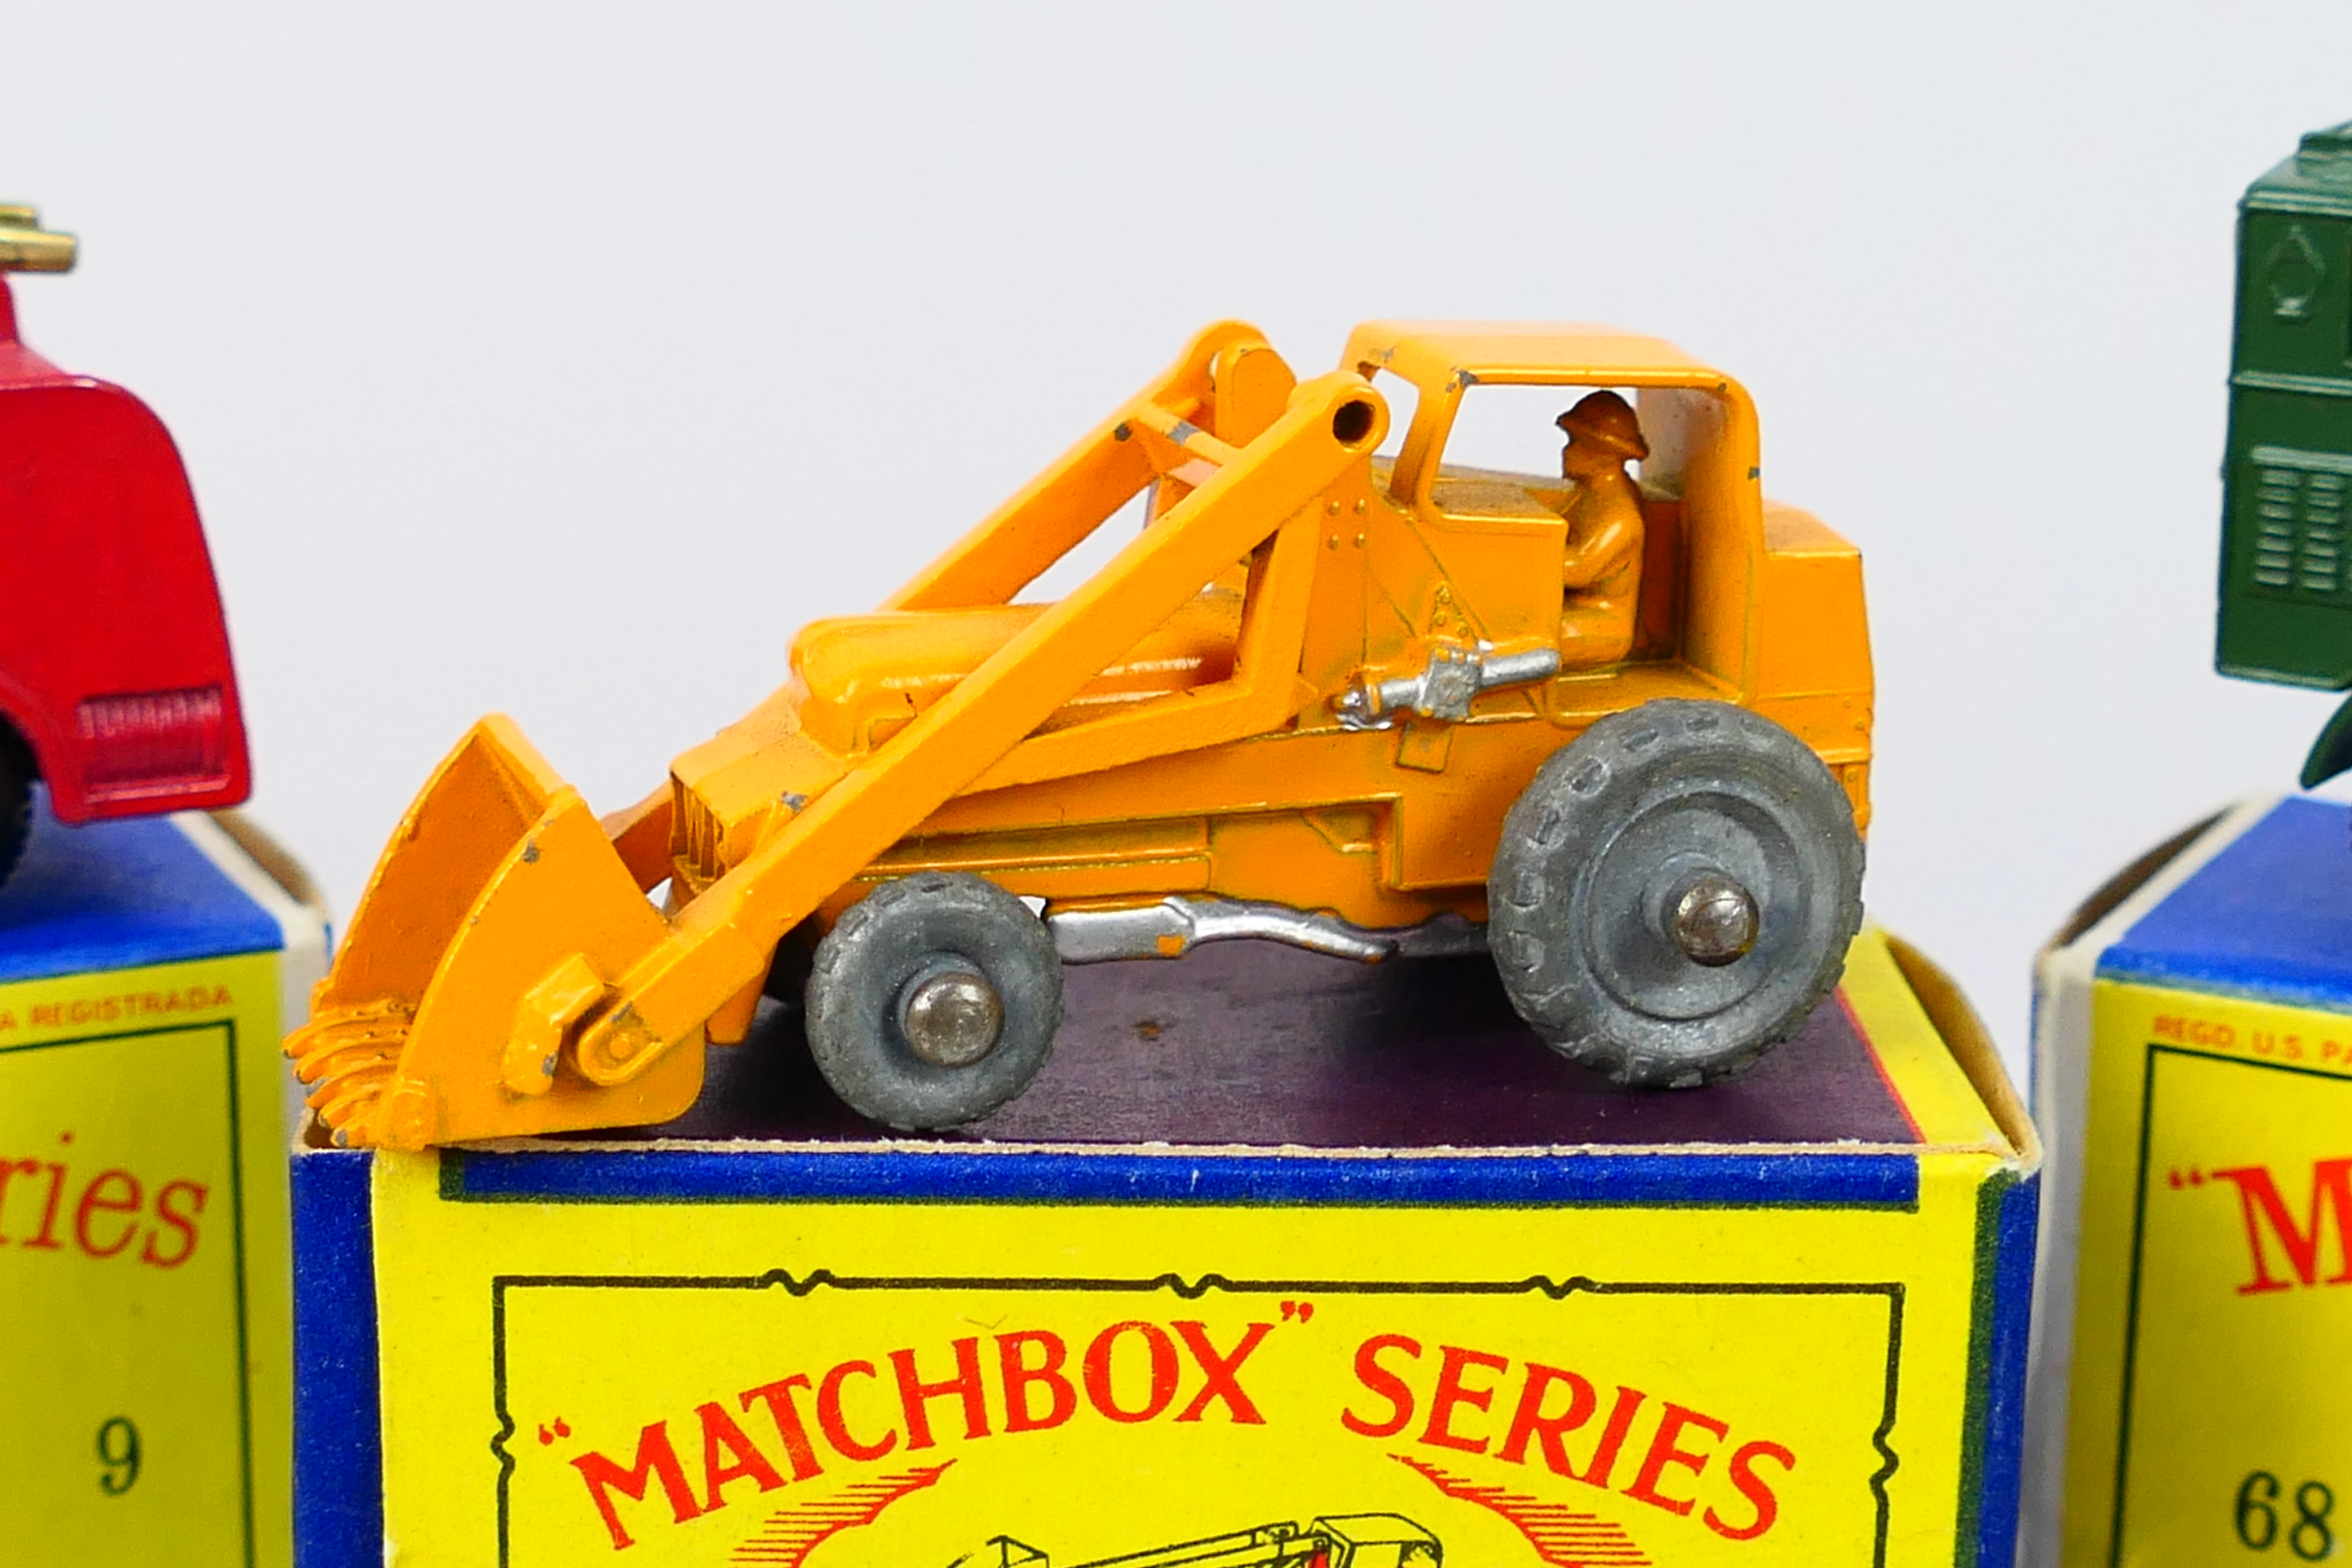 Matchbox - 3 x boxed models, Merryweather Marquis Fire Engine # 9, Weatherill Hydraulic Loader # 24, - Image 2 of 6